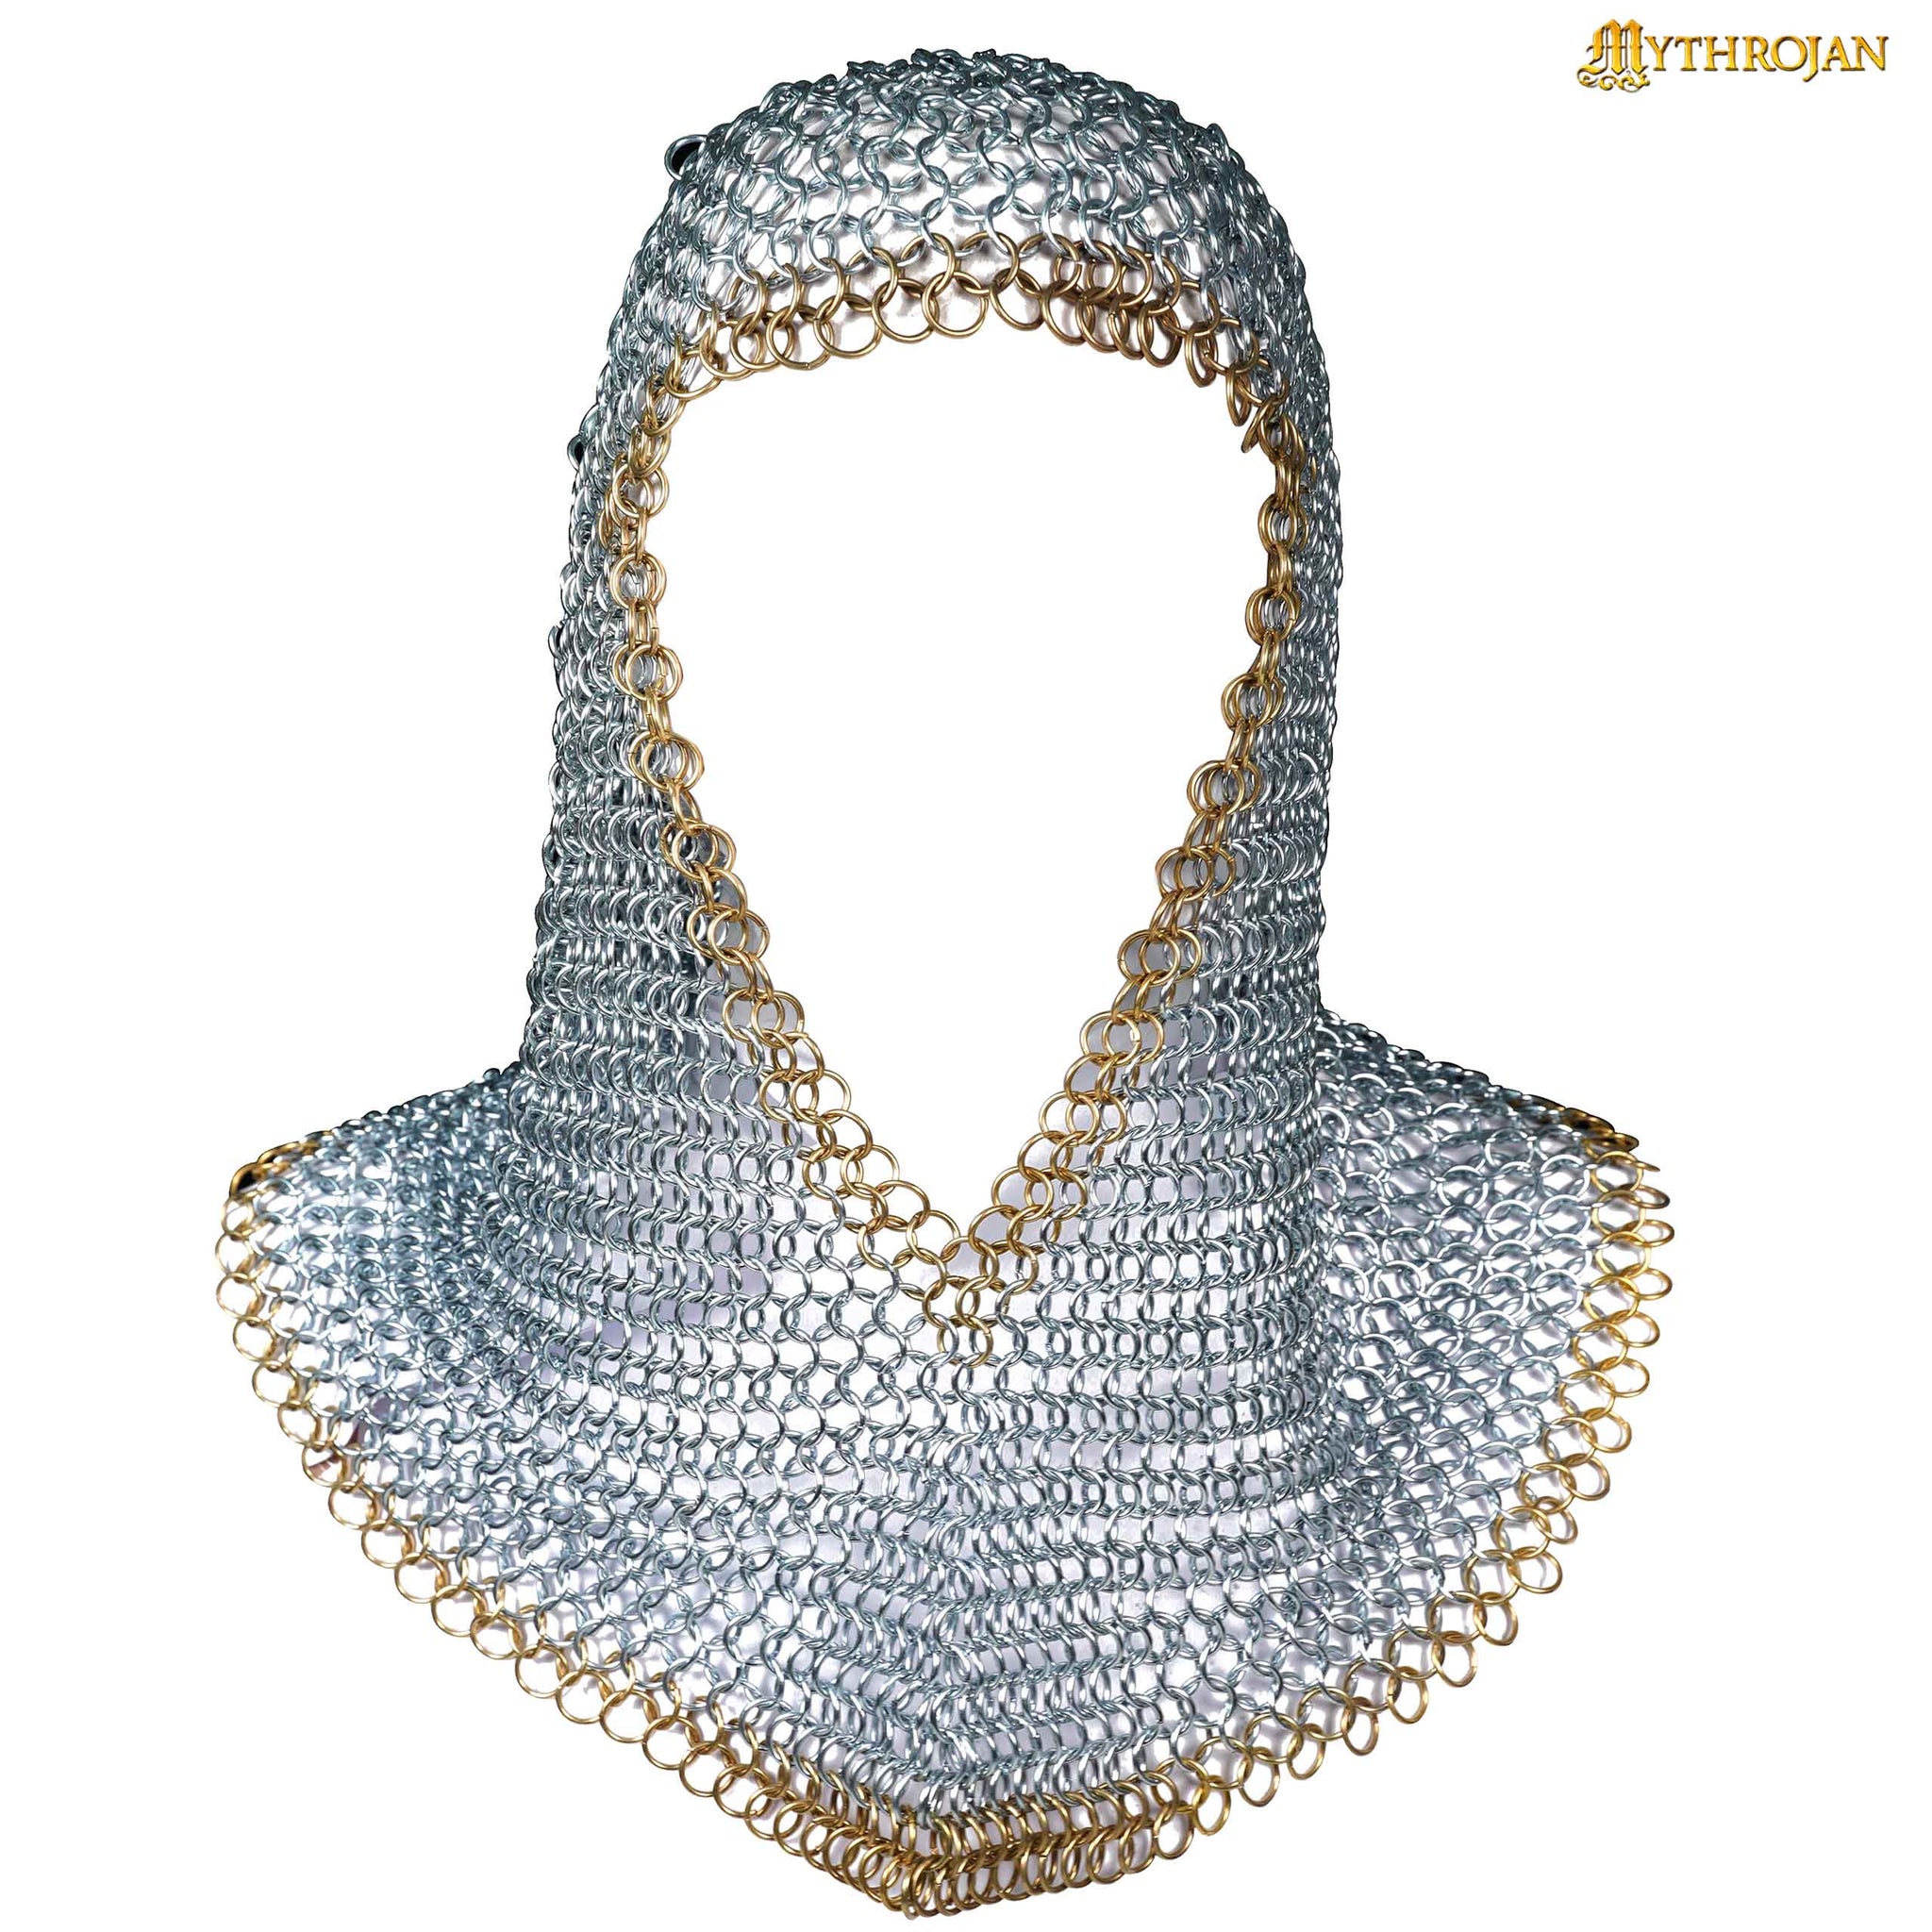 Mythrojan Chainmail Coif Medieval Knight Renaissance Armor Chain Mail Hood  Viking LARP 16 Gauge